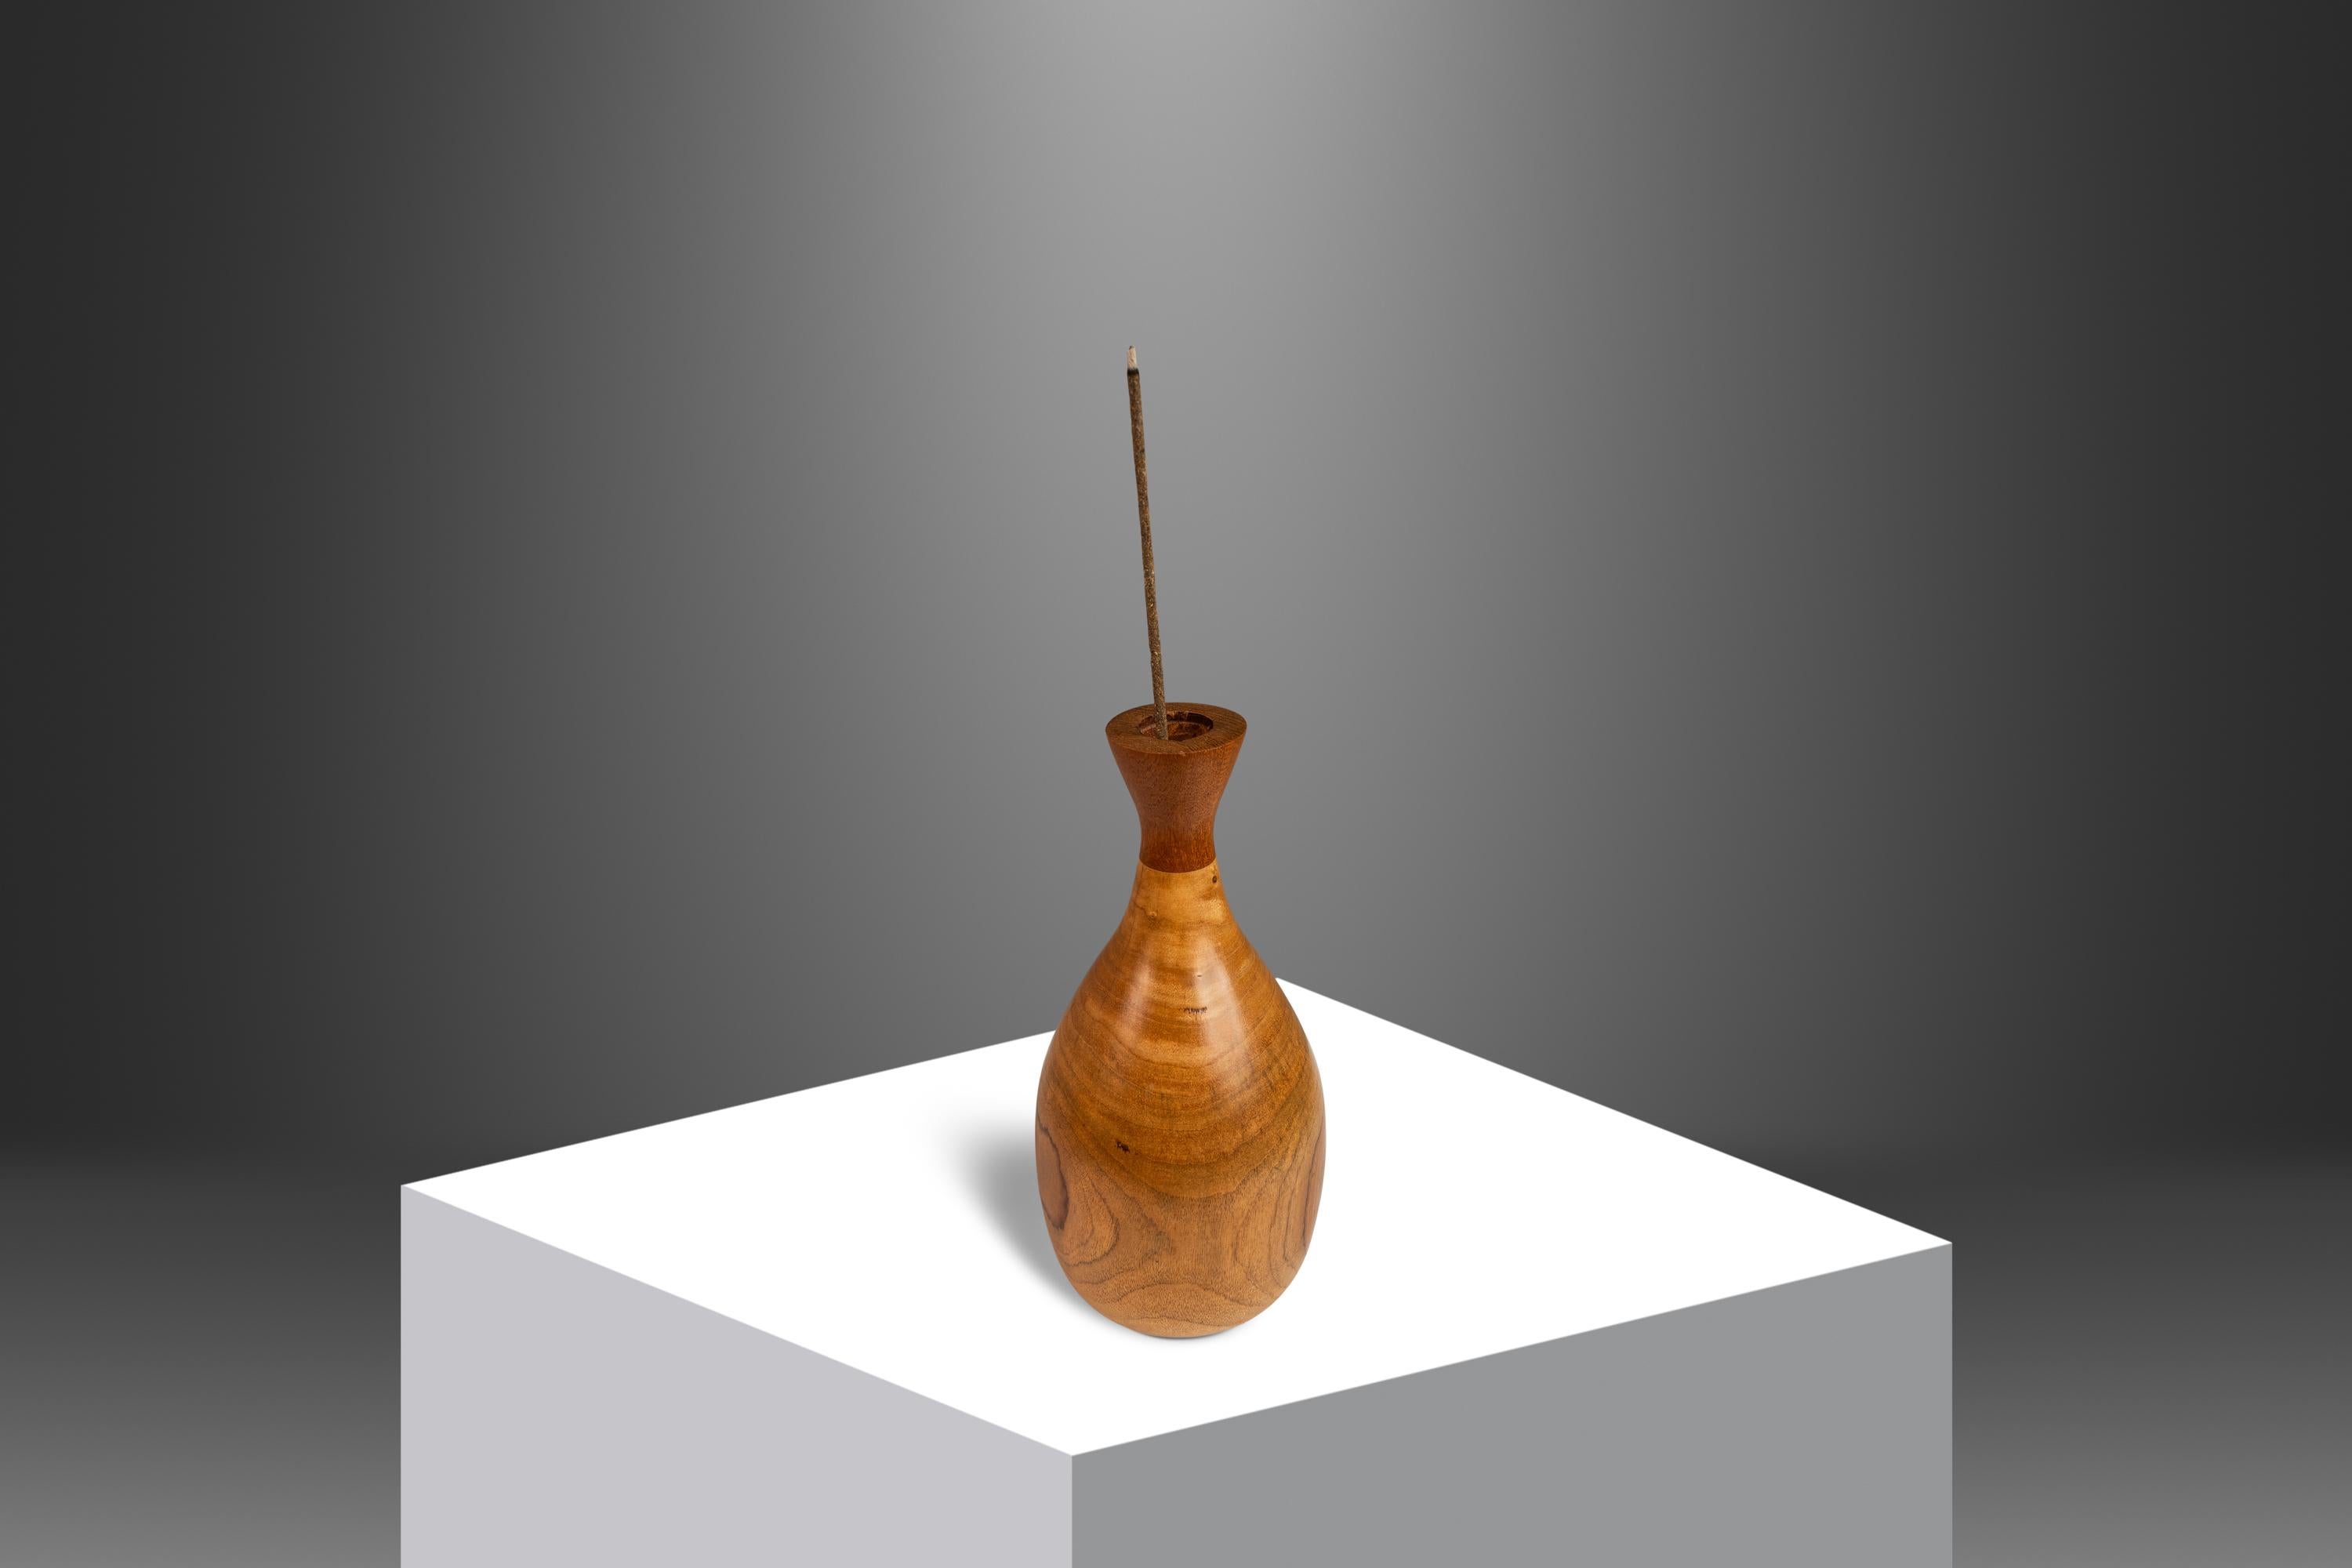  Introducing an artfully crafted Mid-Century Modern wood-turned vase hand-carved from a solid block of mesmerizing burlwood with out-of-this-world swirling woodgrains. The top piece is fashioned from a solid block of Burmese teak offering a unique